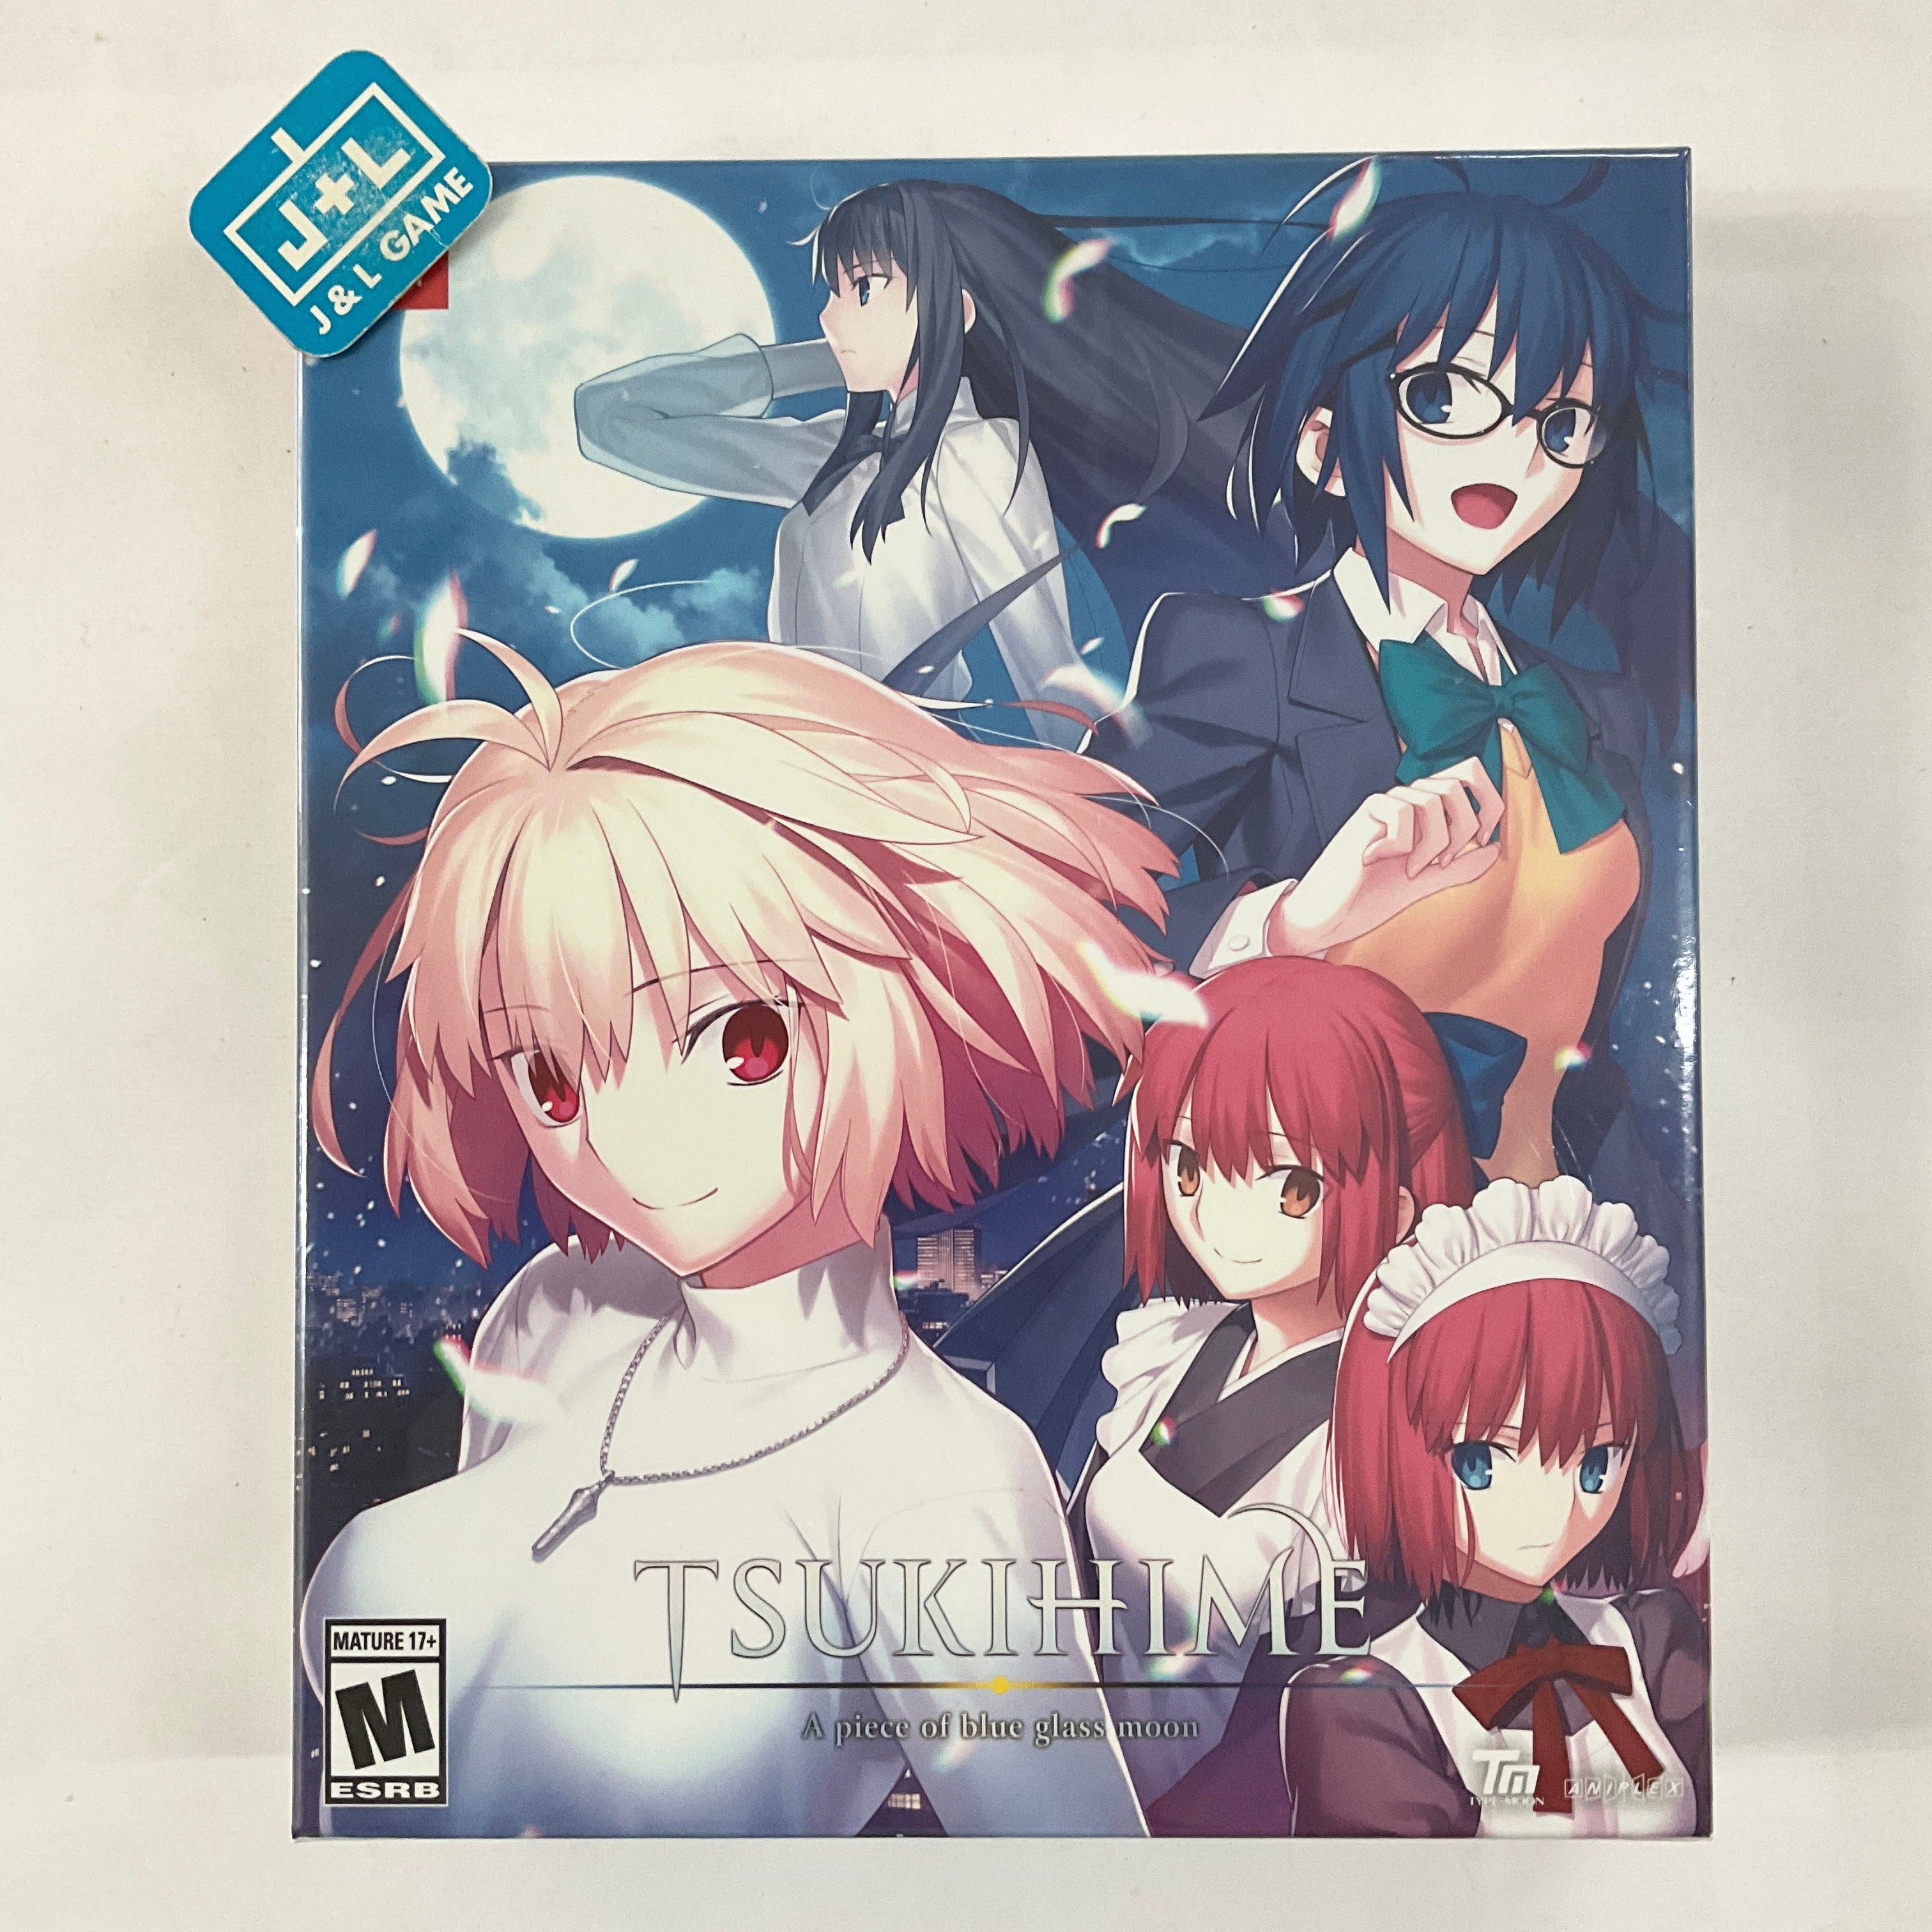 Tsukihime: A Piece of Blue Glass Moon (Limited Edition) - (NSW) Nintendo Switch Video Games Aniplex Inc.   